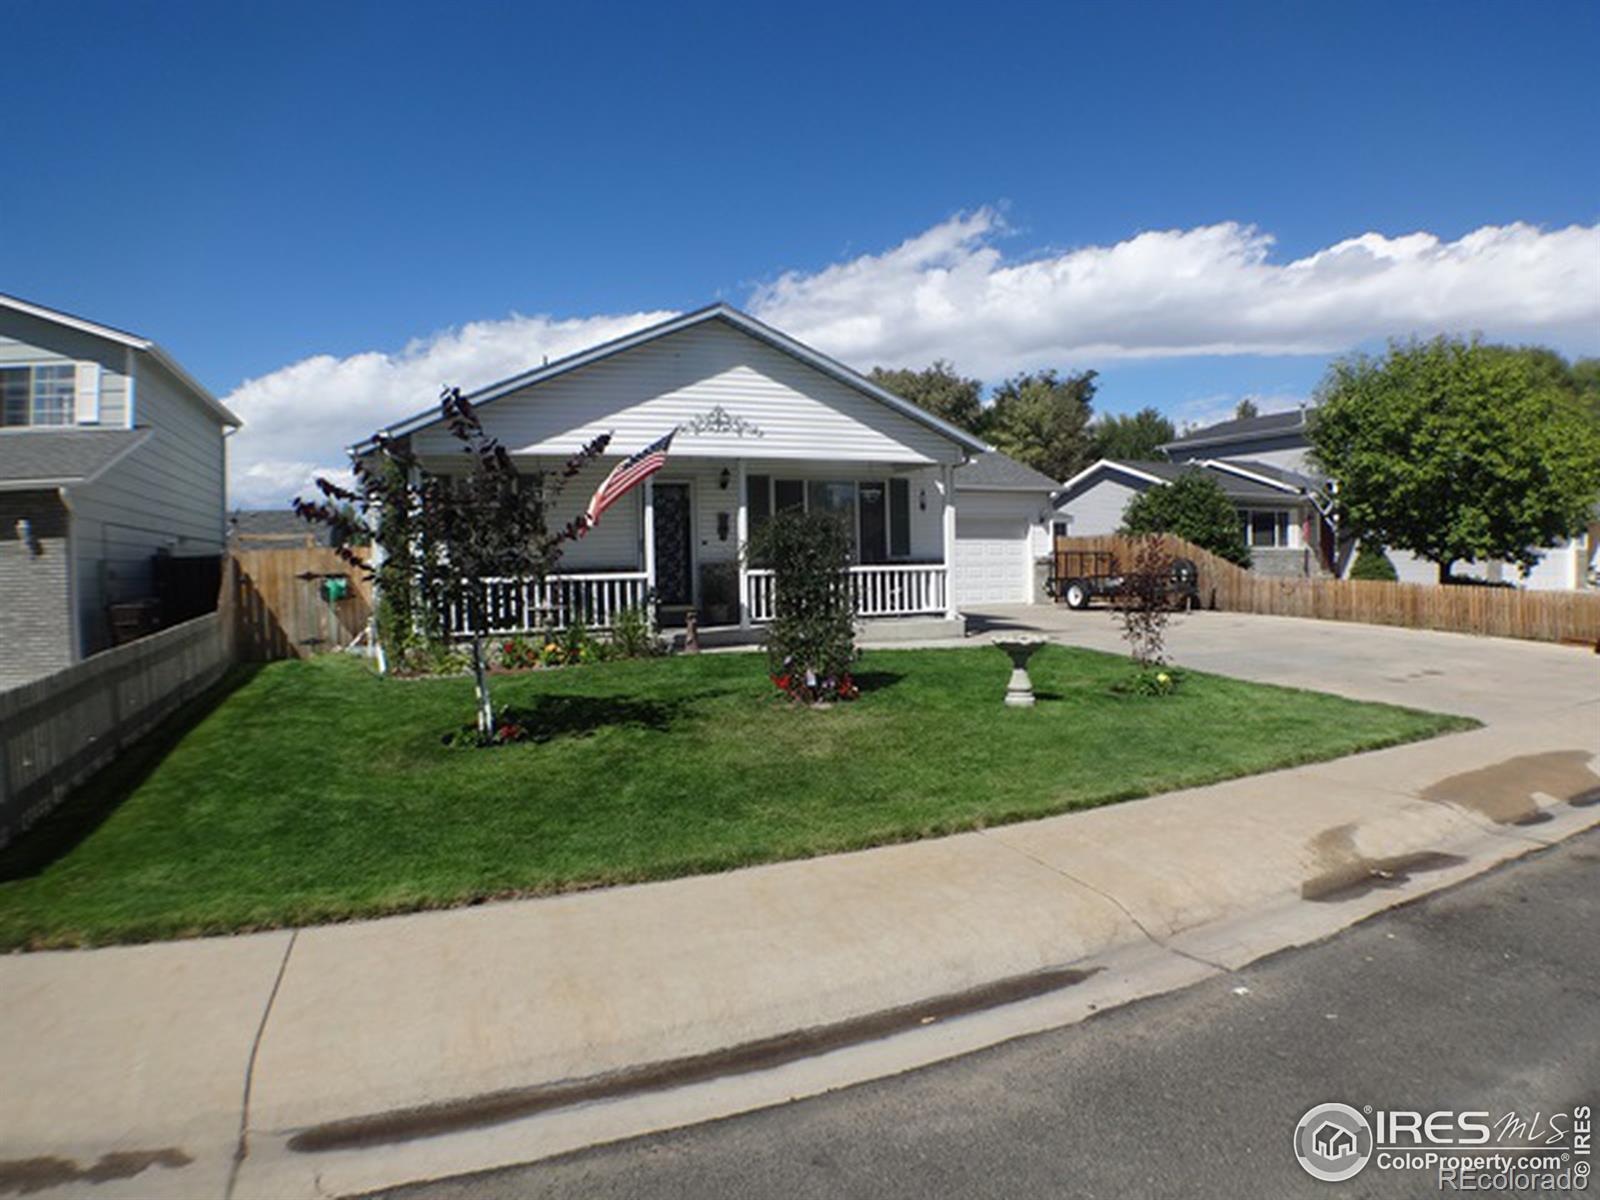 207 49th, Greeley, CO